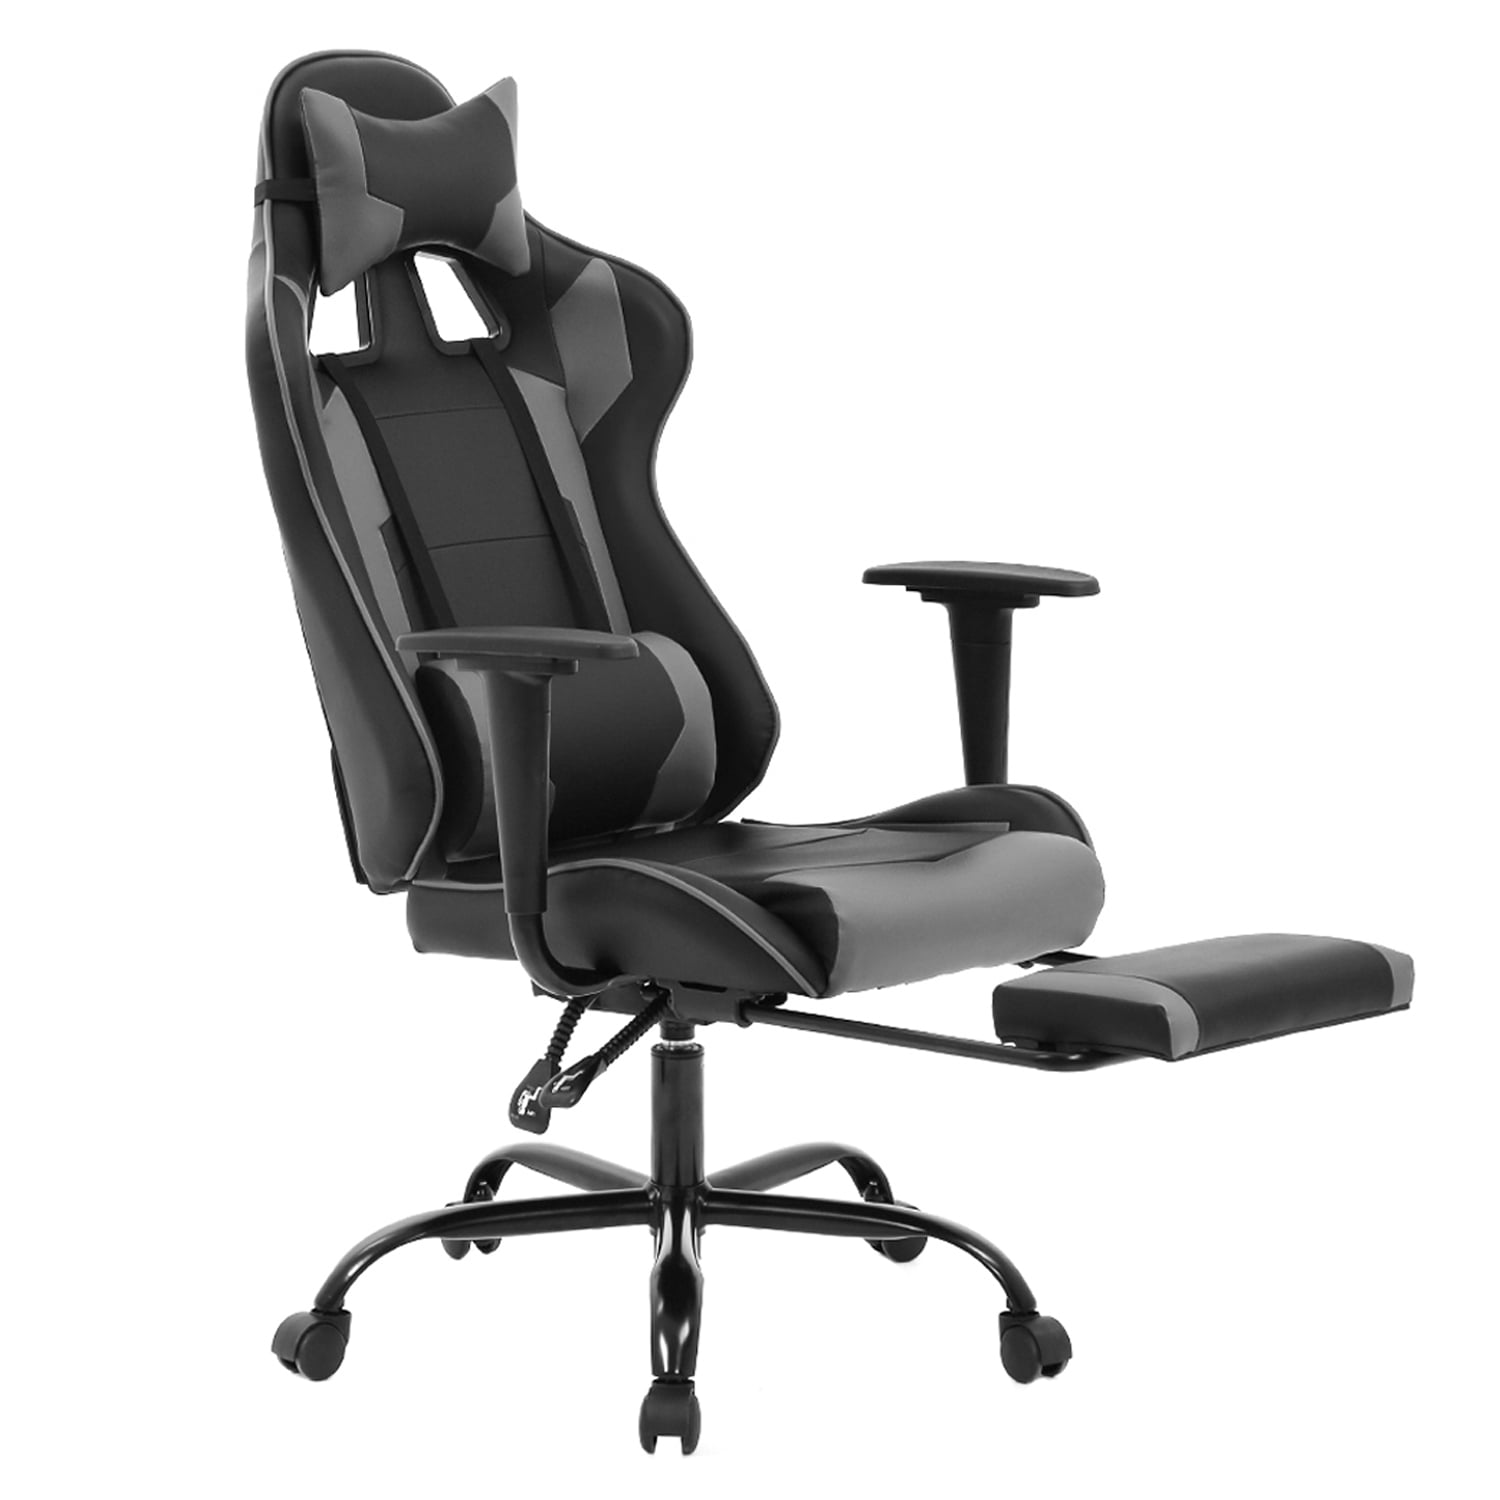 Details about   ERGONOMIC GAMING RACING CHAIR COMPUTER DESK SWIVEL OFFICE EXECUTIVE PU LEATHER 